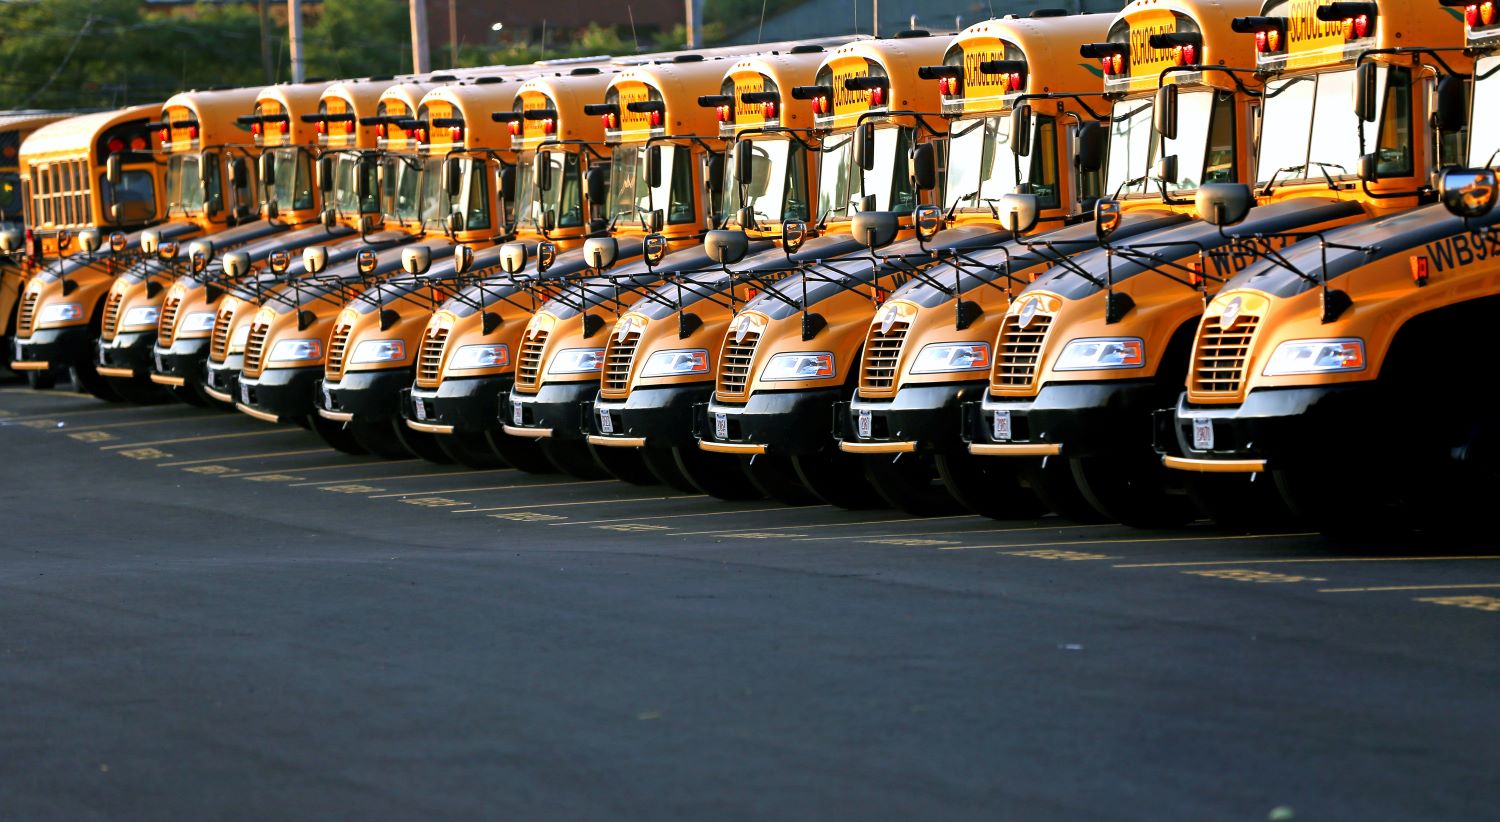 Row of school buses in a parking lot David L. Ryan The Boston Globe via Getty Images